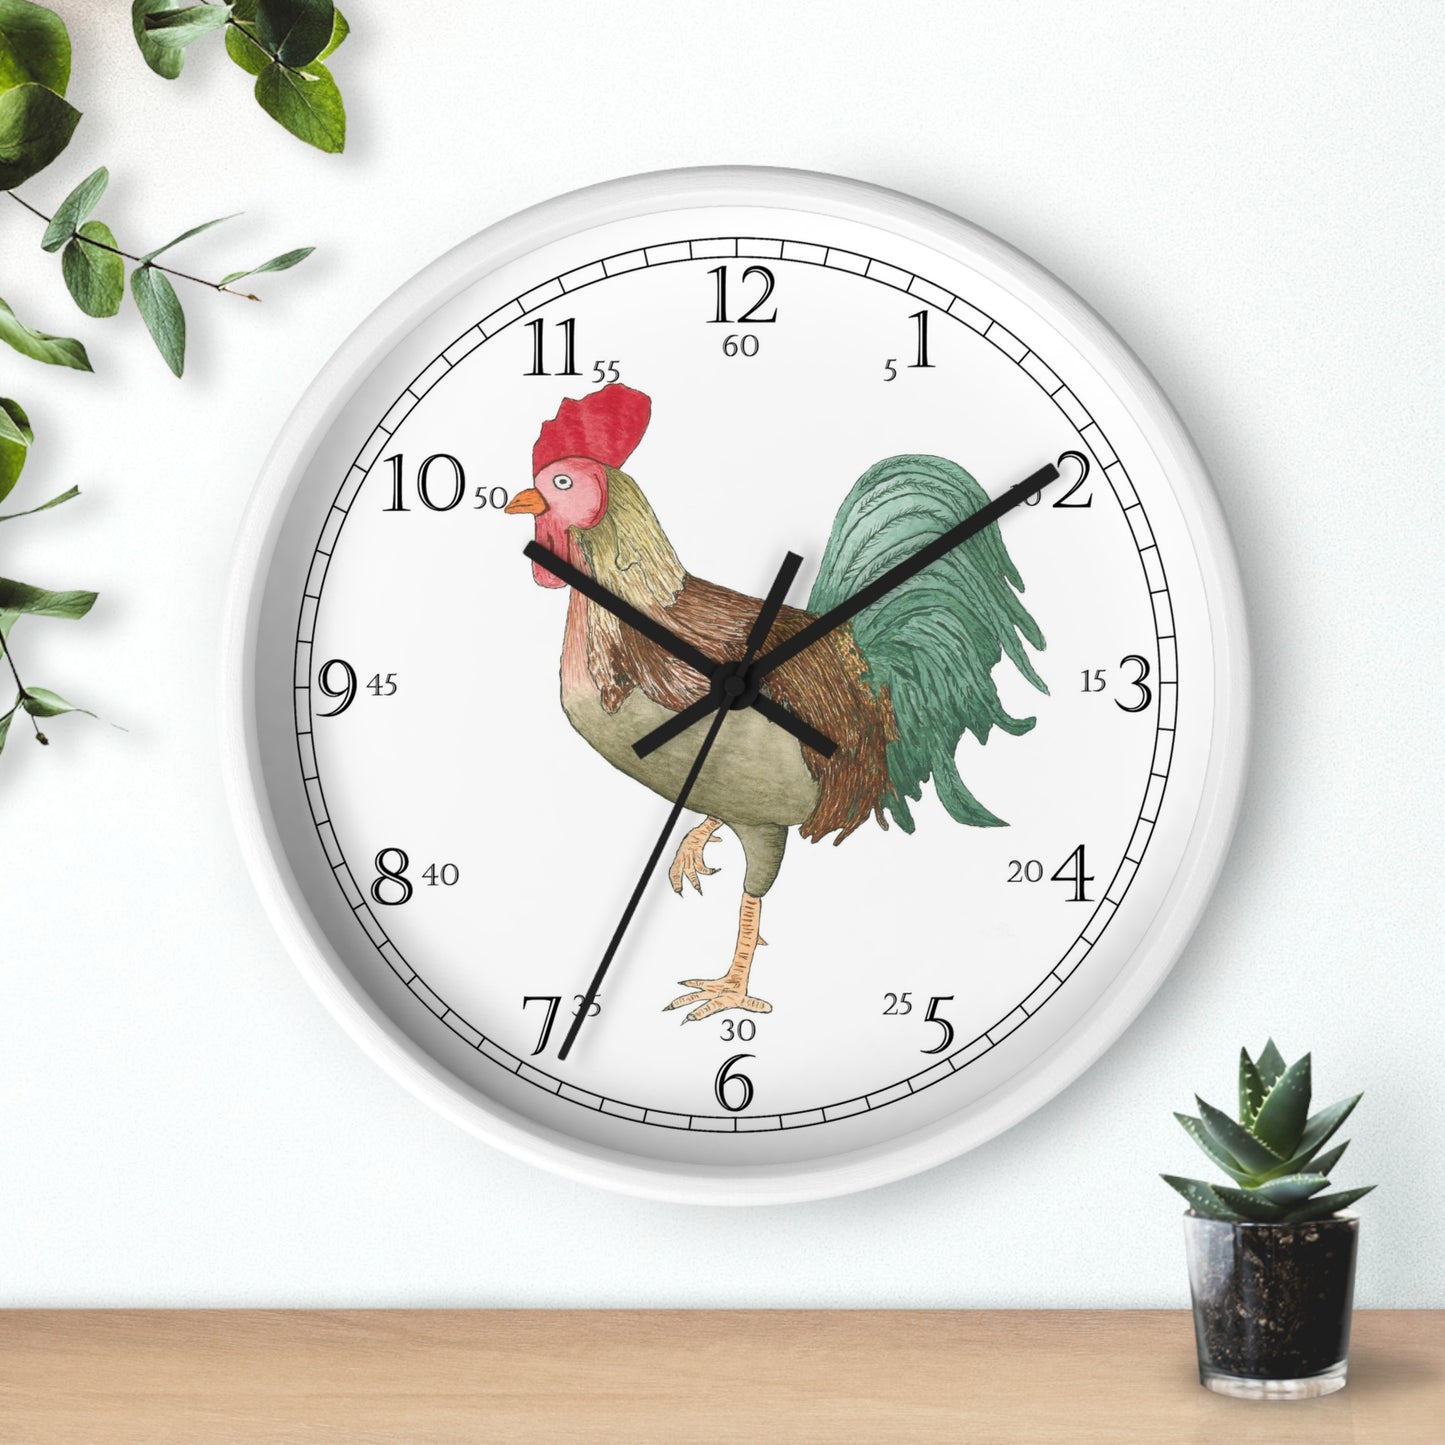 Michael Rooster English Numeral Clock